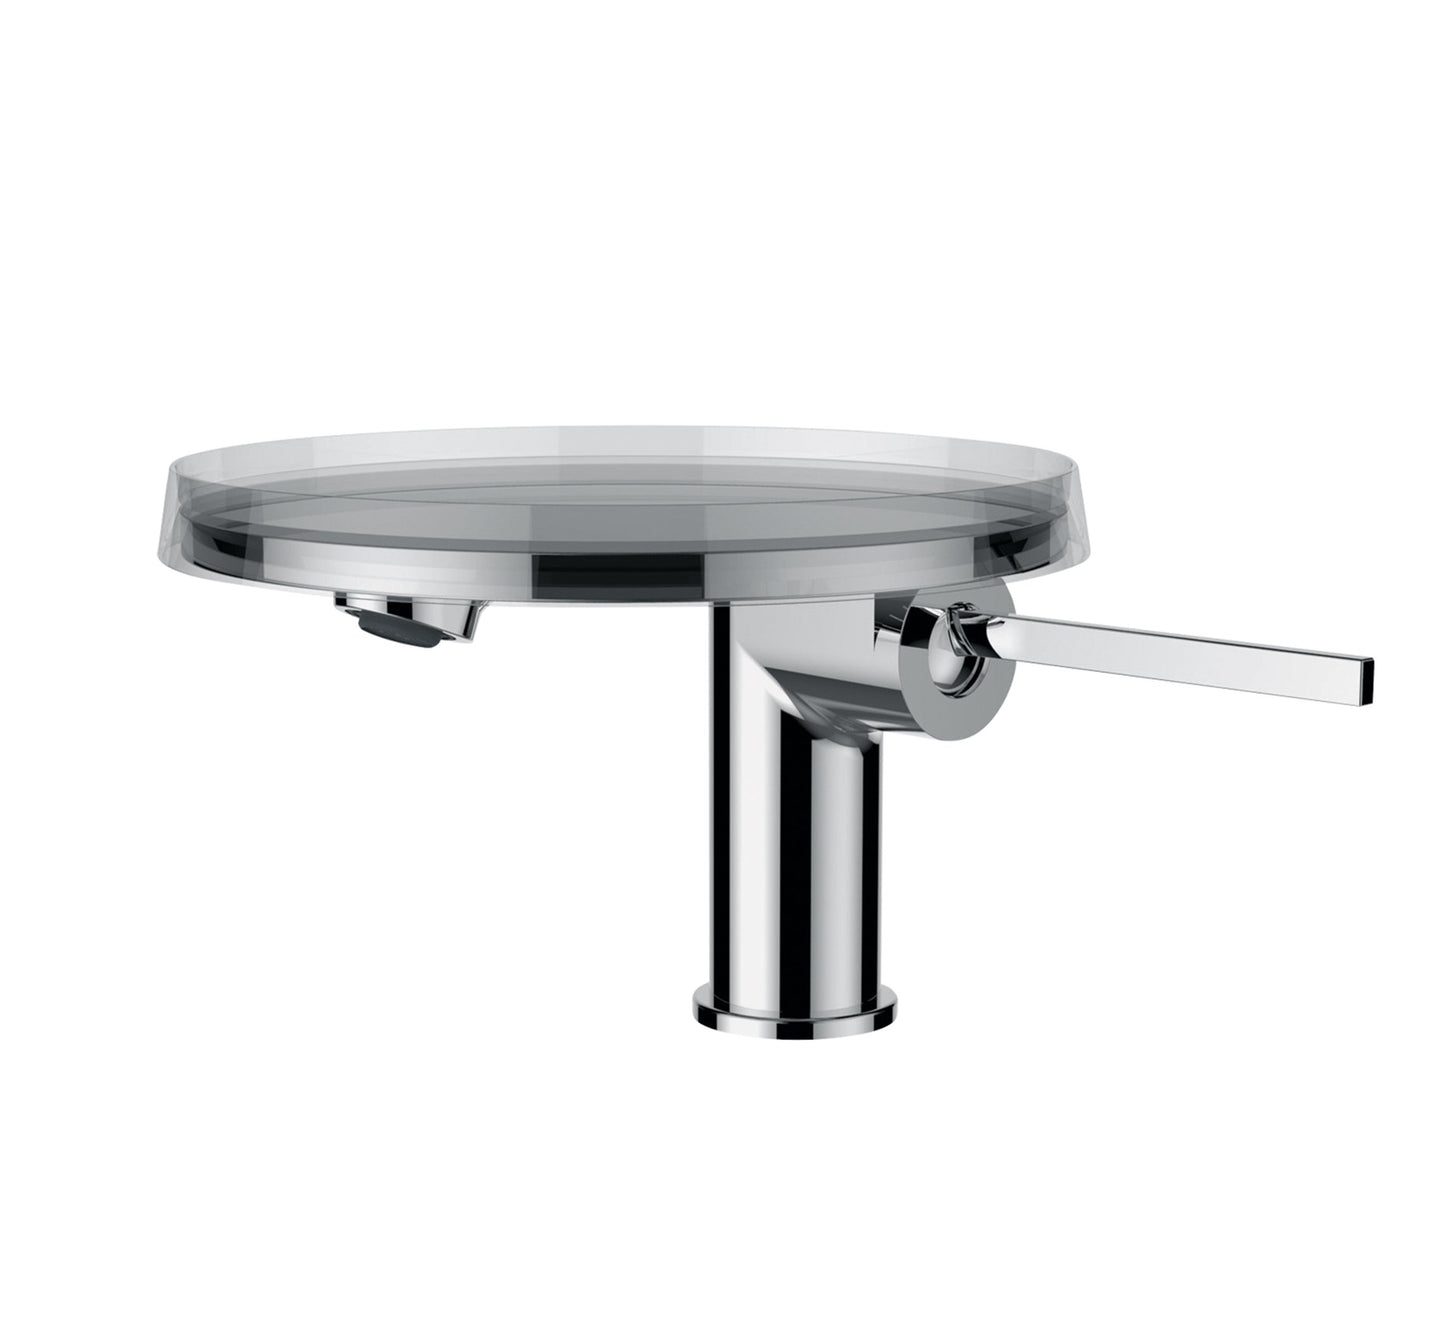 LAUFEN KARTELL SINGLE LEVER MIXER DISC FOR WASHBASINS, FIXED SPOUT 110 MM, TRANSPARENT PLASTIC DISC INCLUDED, WITH POP-UP WASTE SET 1 1/4" BRASS CHROME PLATED - 3.1133.1.004.111.1 - Tadmur Trading